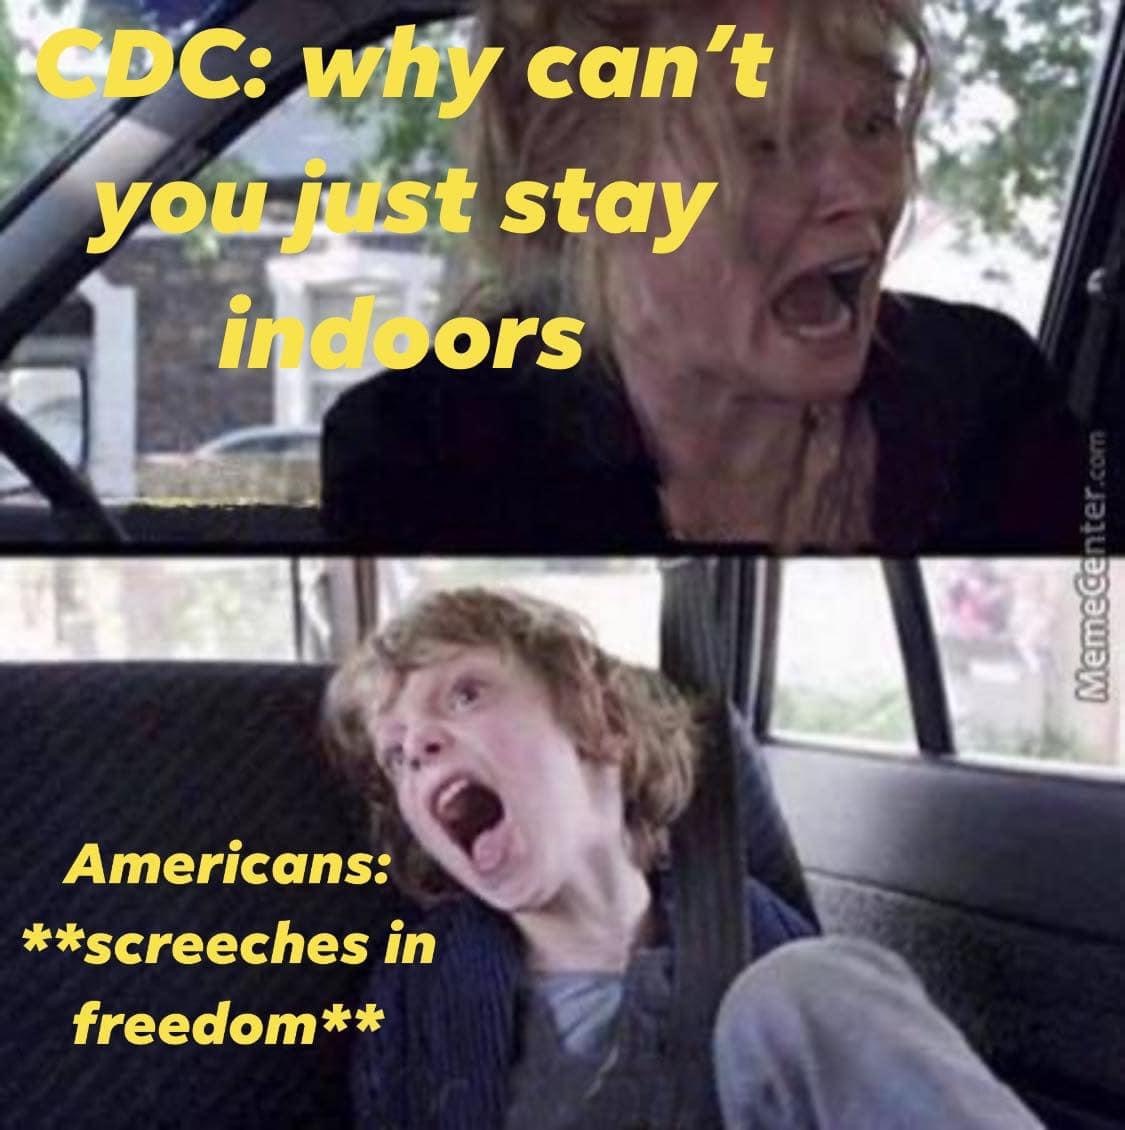 can t you just be normal meme - Dc why can't you must stay indoors Memecenter.com Americans screeches in freedom